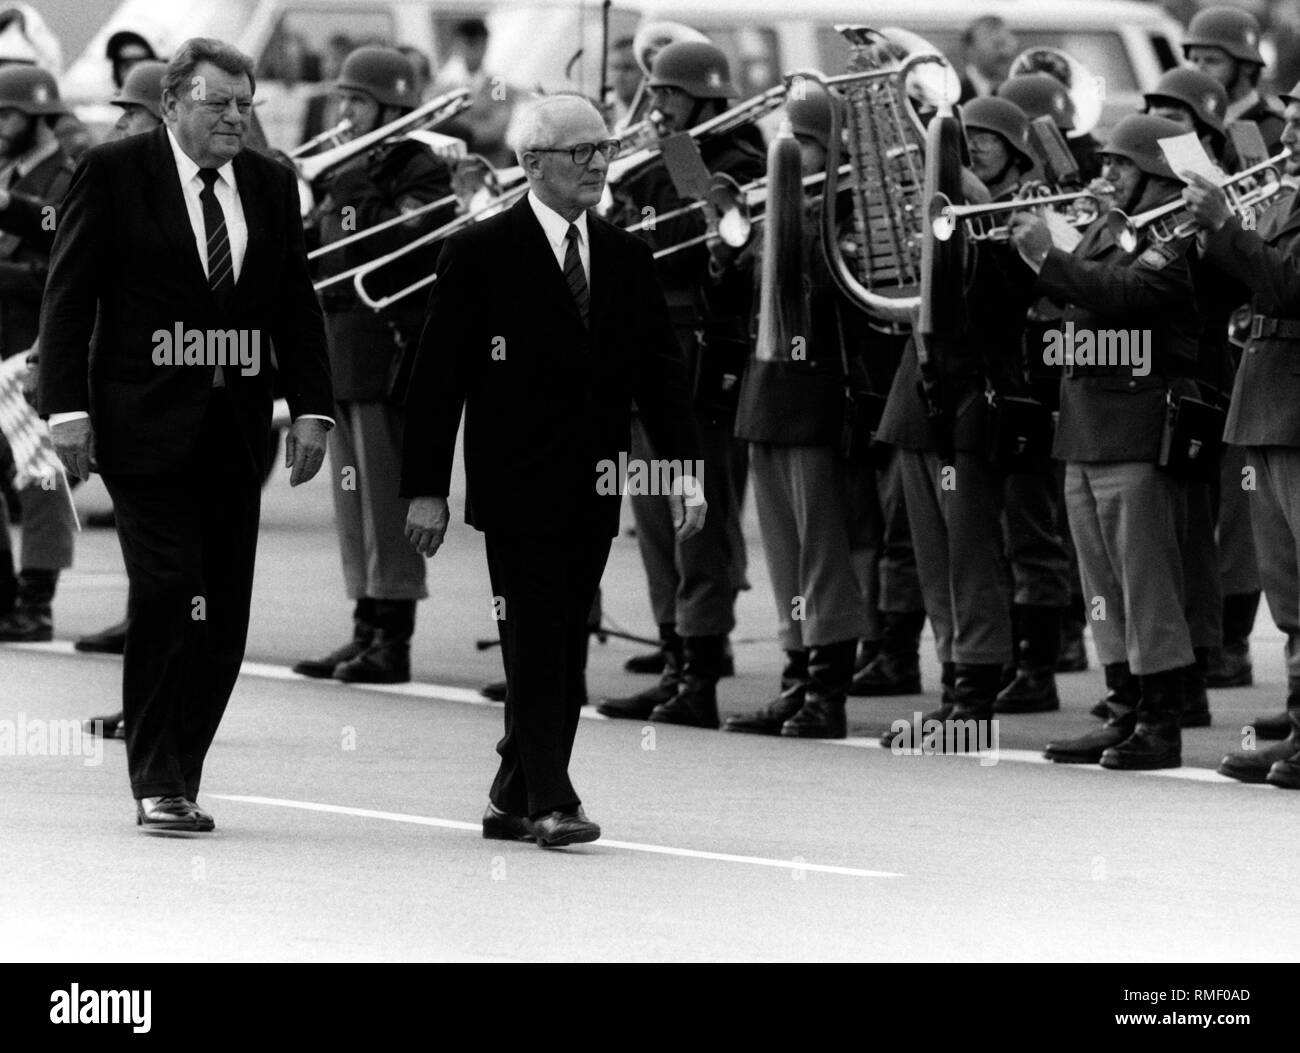 Bavarian Prime Minister Franz Joseph Strauss receives the State Council Chairman of the GDR, Erich Honecker at the Munich-Riem Airport. In the background policemen are making music. Stock Photo